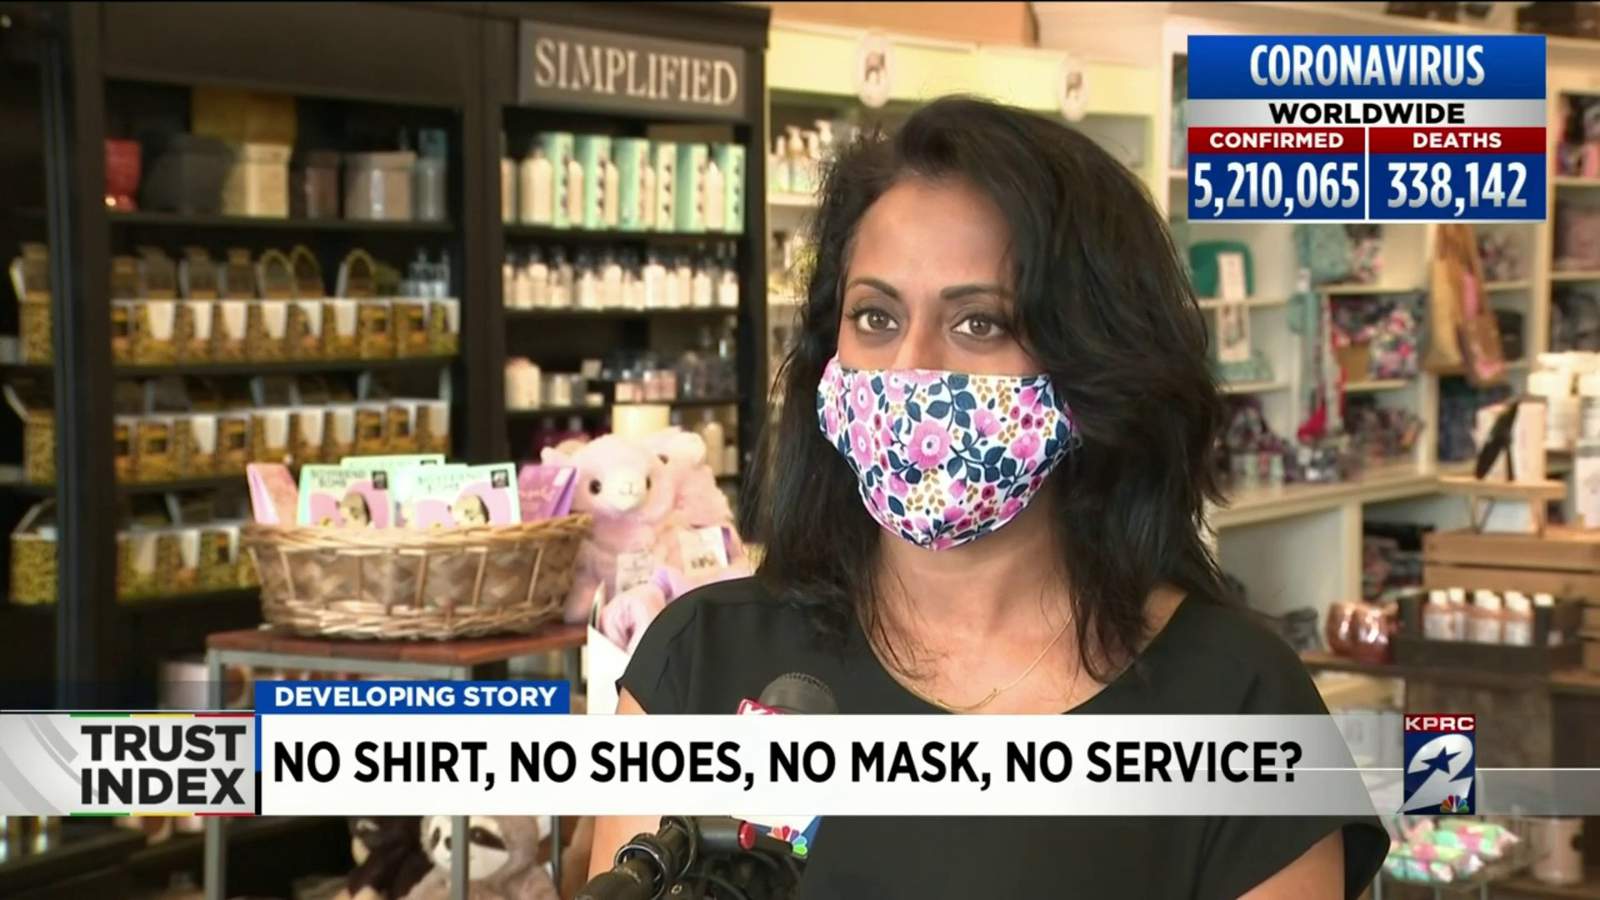 No mask, no service: Can businesses legally require customers to wear masks?